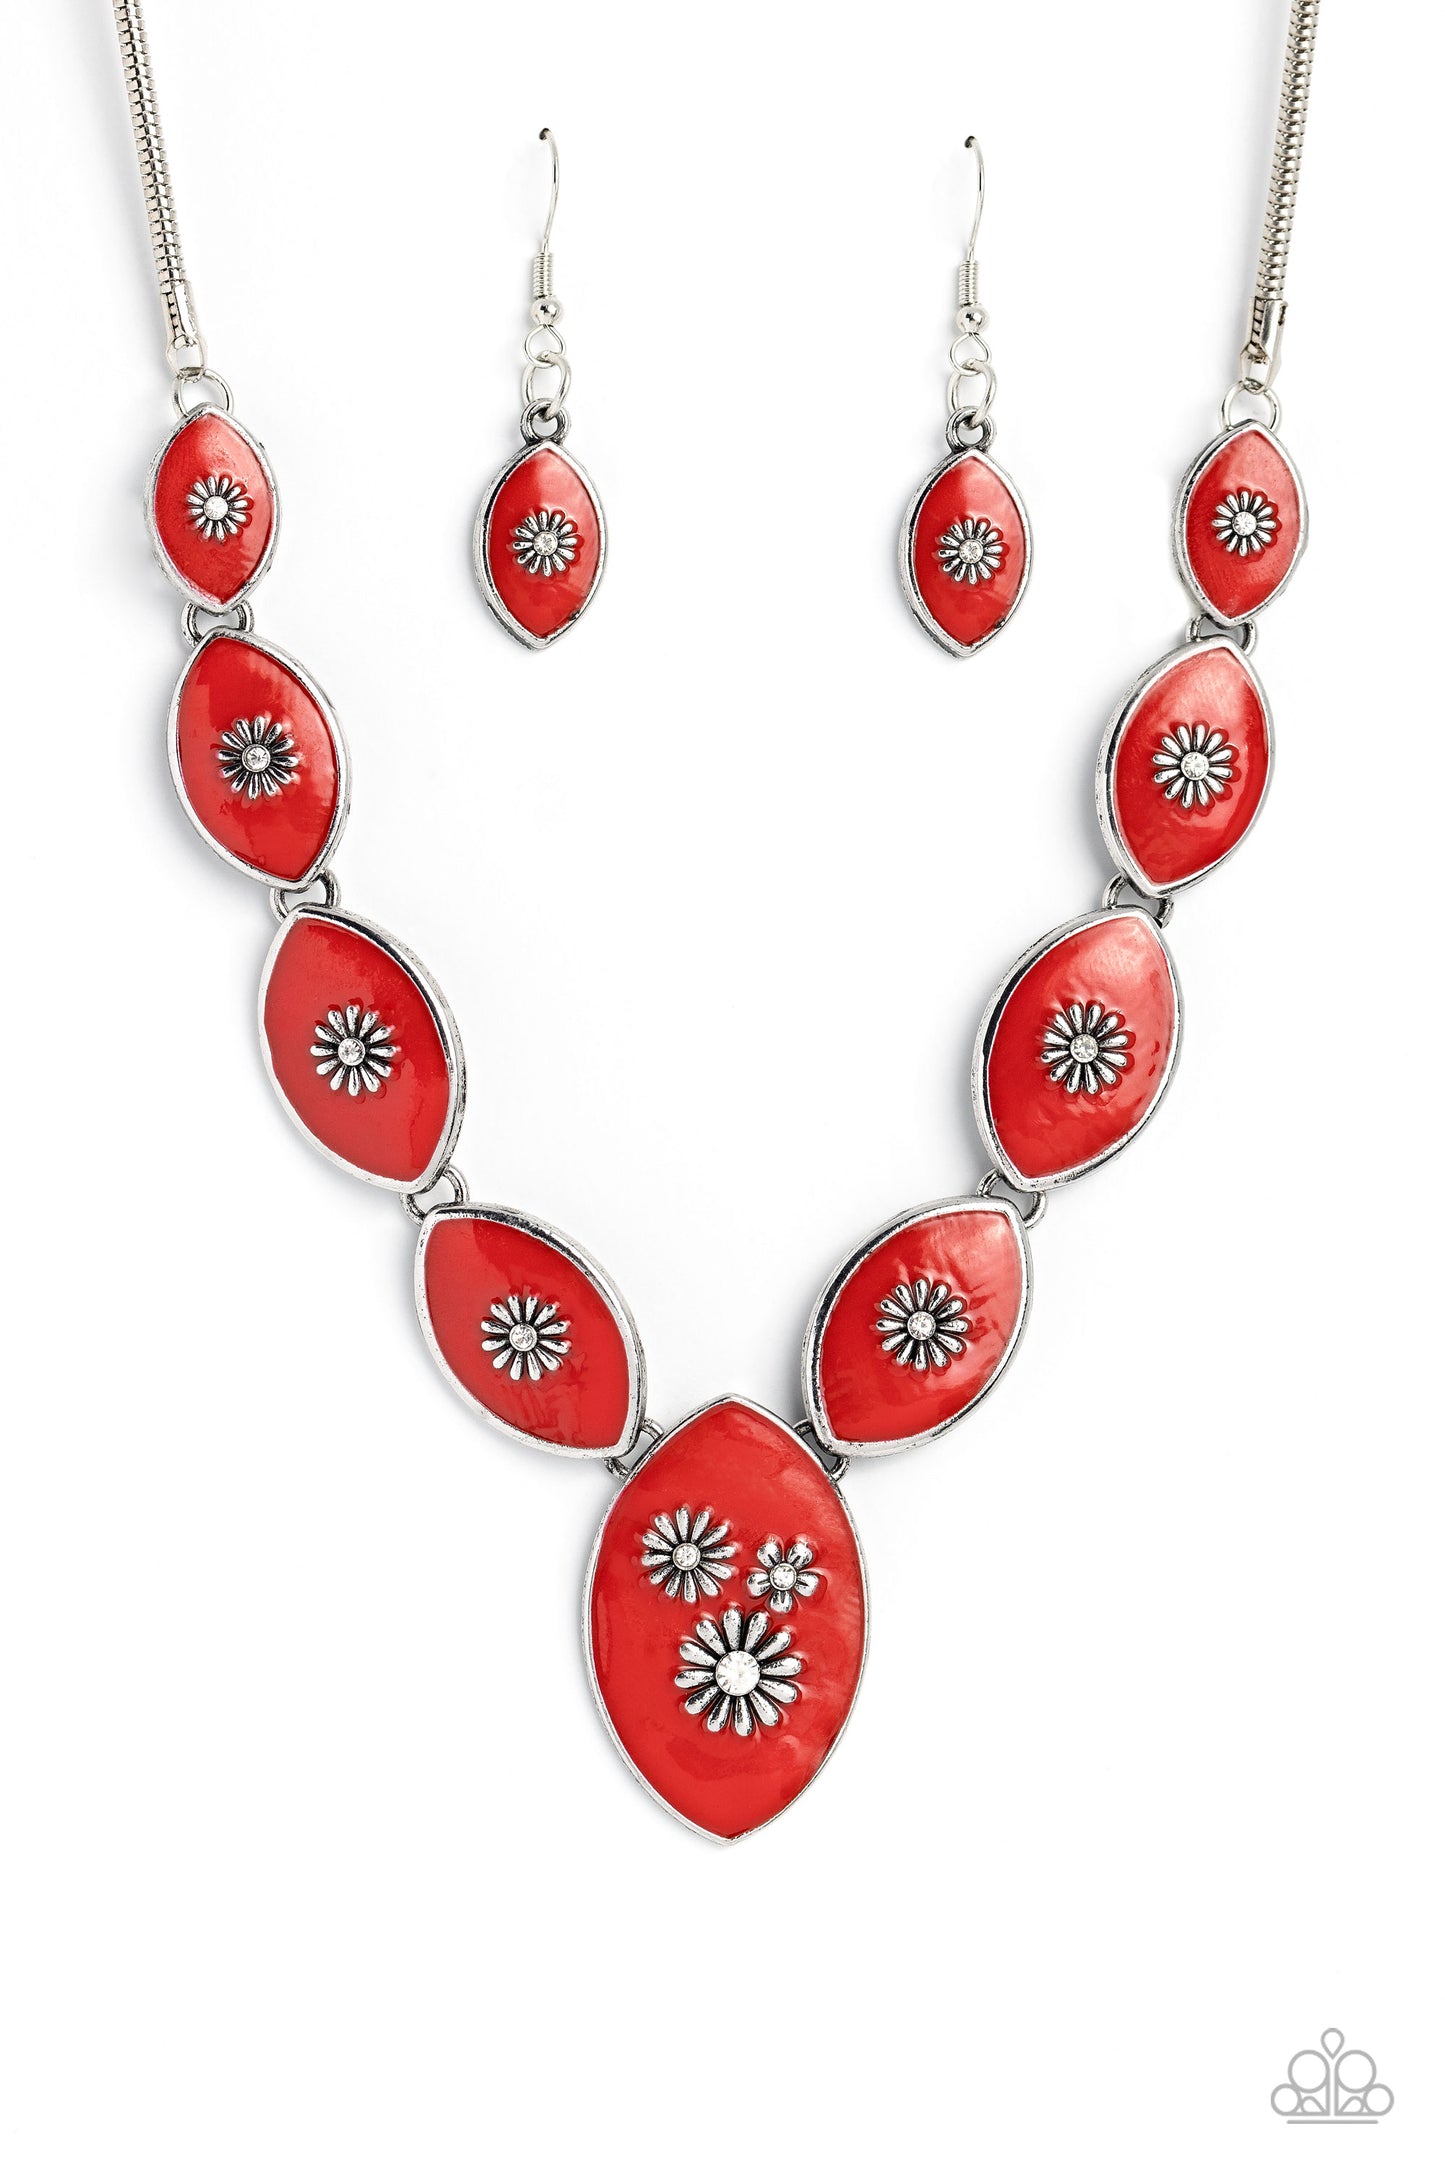 Paparazzi Accessories - Pressed Flowers - Red Necklaces featuring vibrant red paint, a collection of silver marquise-shaped frames gradually increase in size as they taper below the collar in a timeless fashion on a silver snake chain. Each frame is embossed with a delicate silver flower with a white rhinestone center, with the centermost pendant featuring three flowers, creating a glamorous array of whimsicality. Features an adjustable clasp closure.